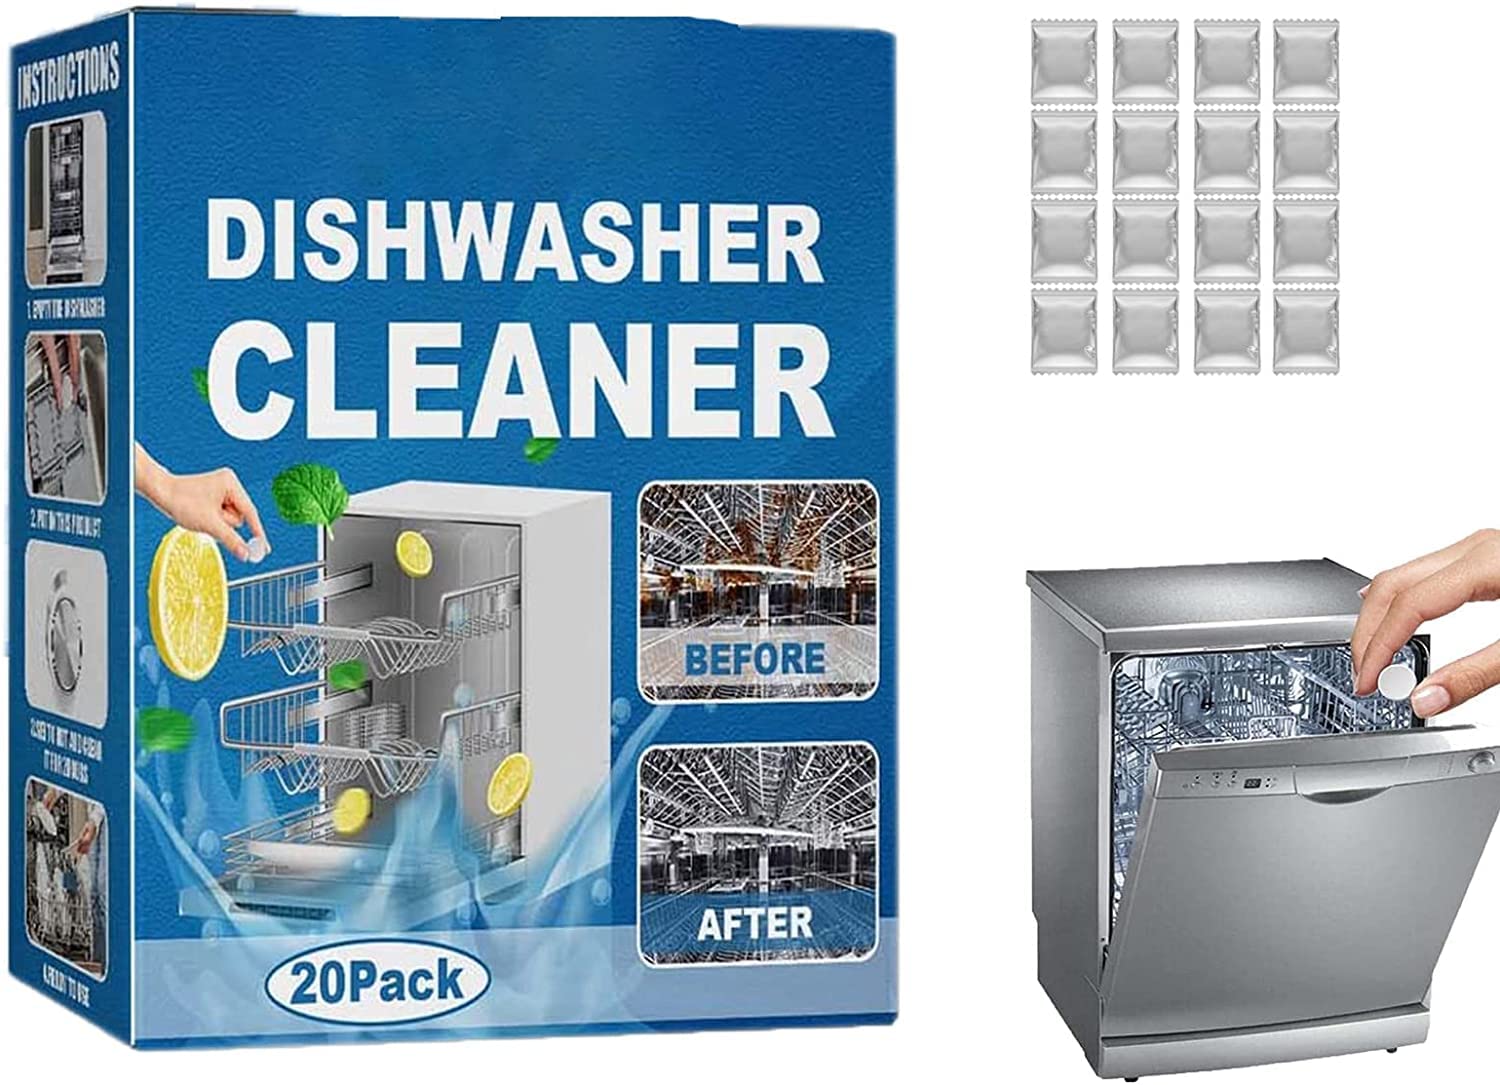 Dishwasher Tablets, Dishwasher Cleaning Tablets Removes Limescale Build Up, Highly Efficient Dishwasher Cleaner for Kitchen Tableware Care (20pc)